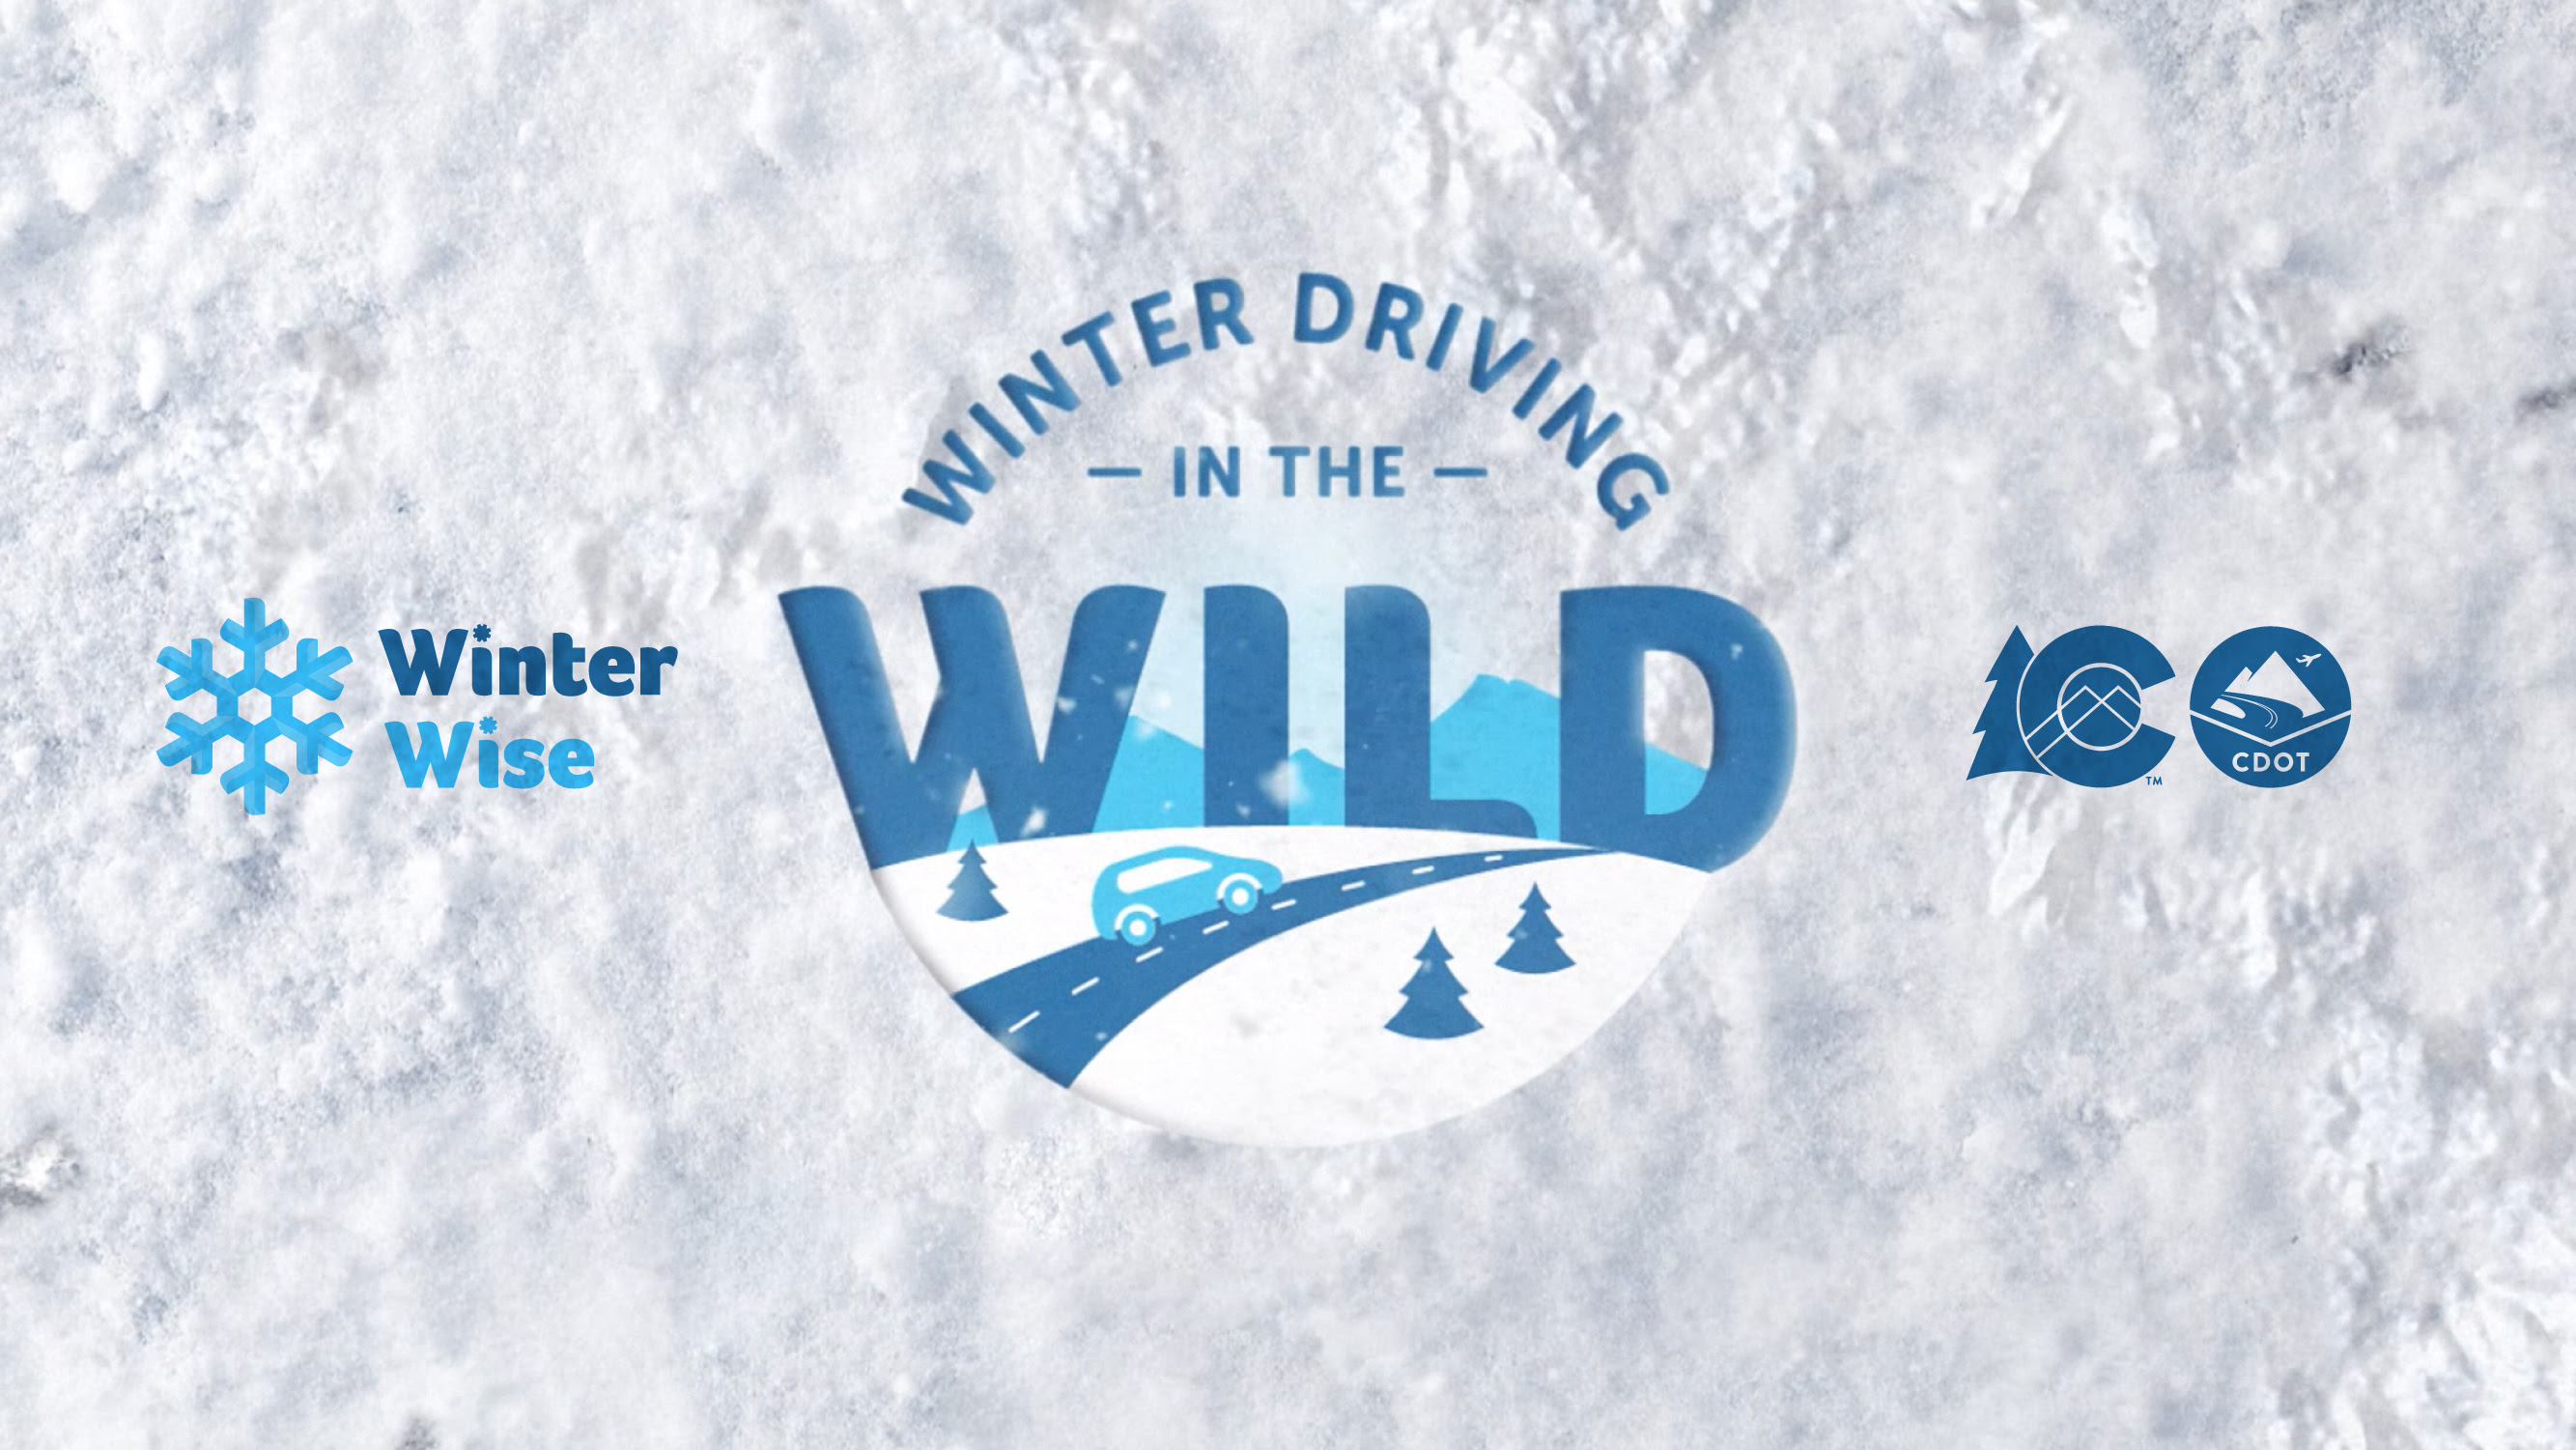 winter driving in the wild.jpg detail image